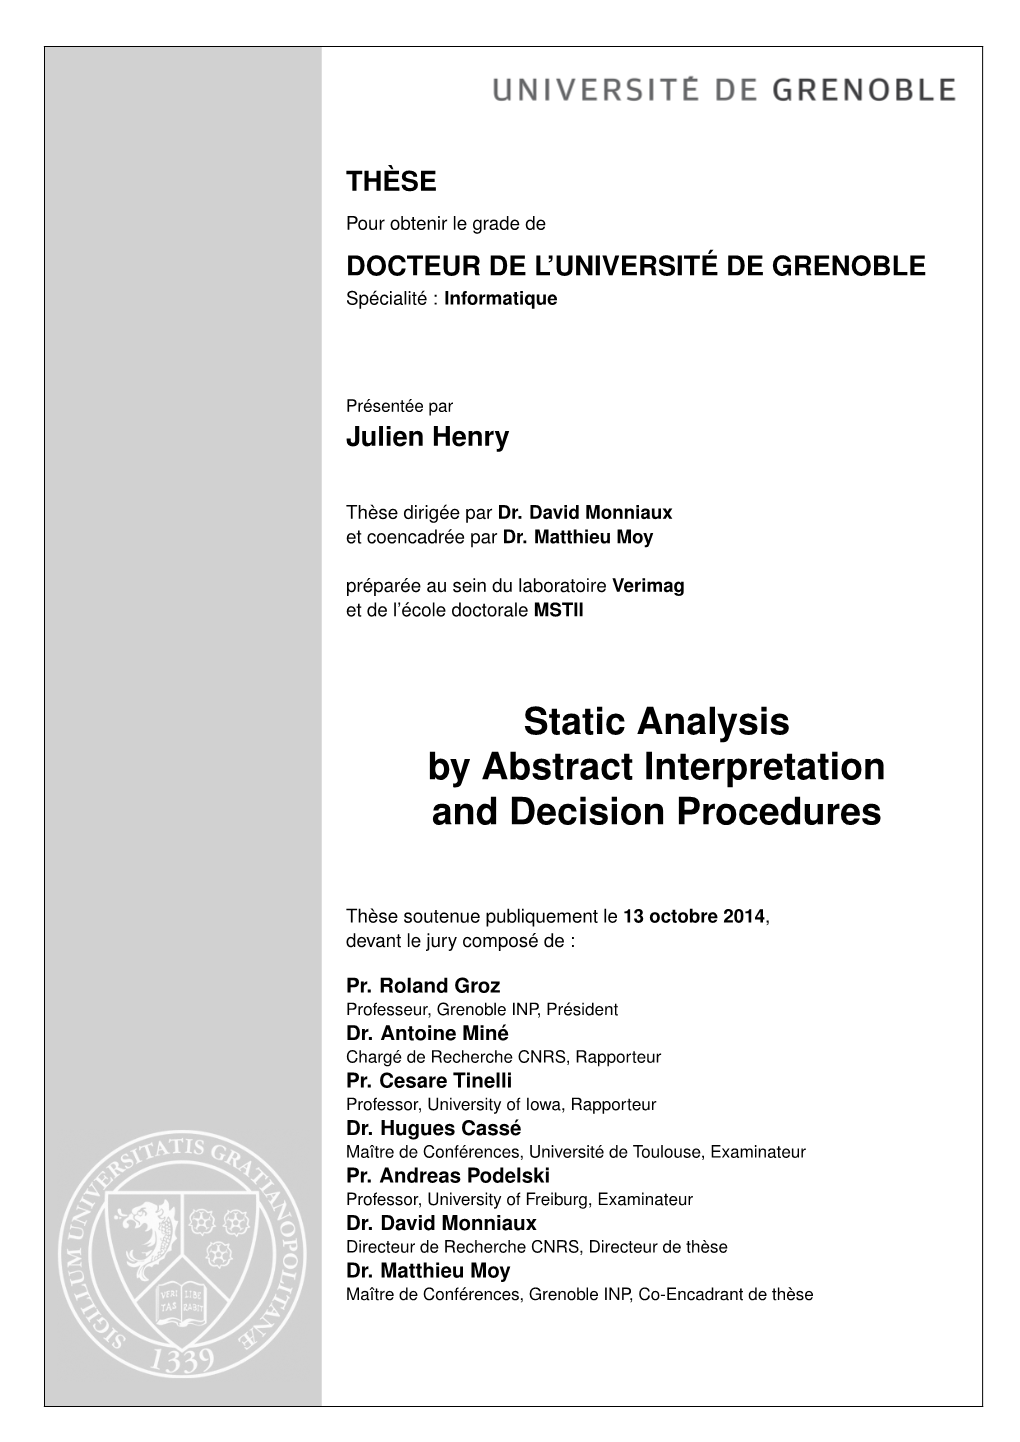 Static Analysis by Abstract Interpretation and Decision Procedures